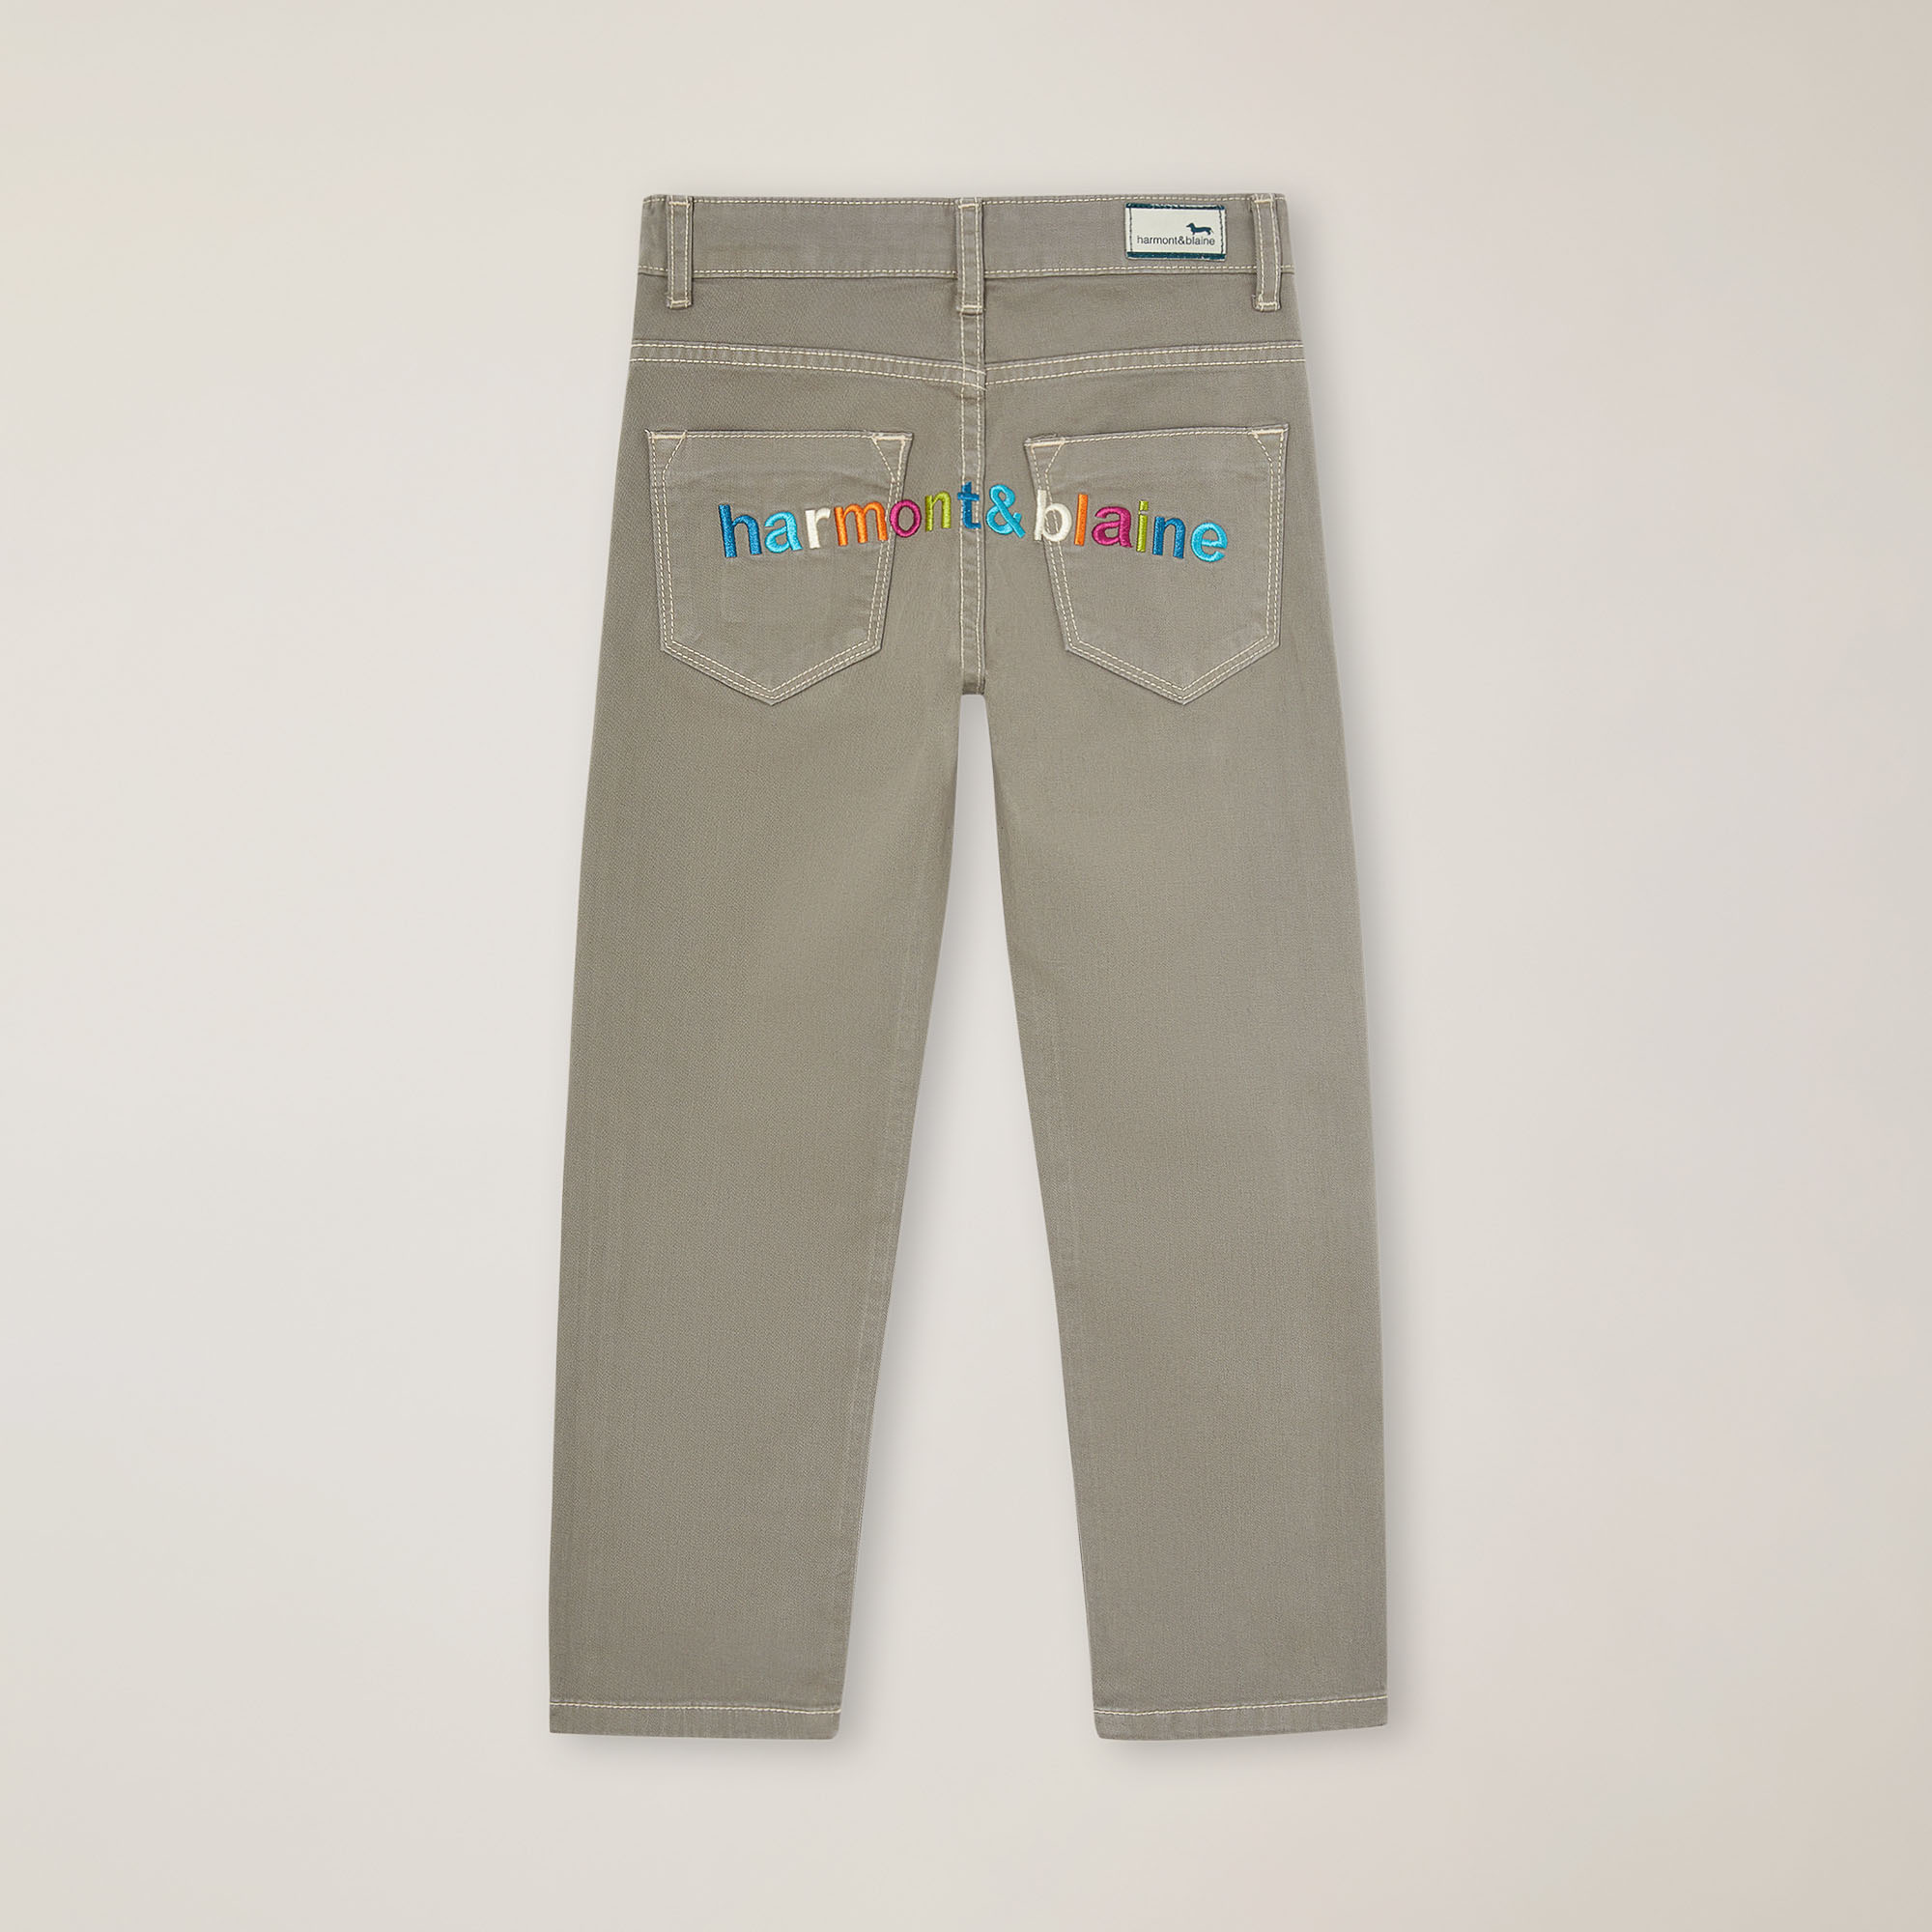 Five-pocket pants with embroidery on the back